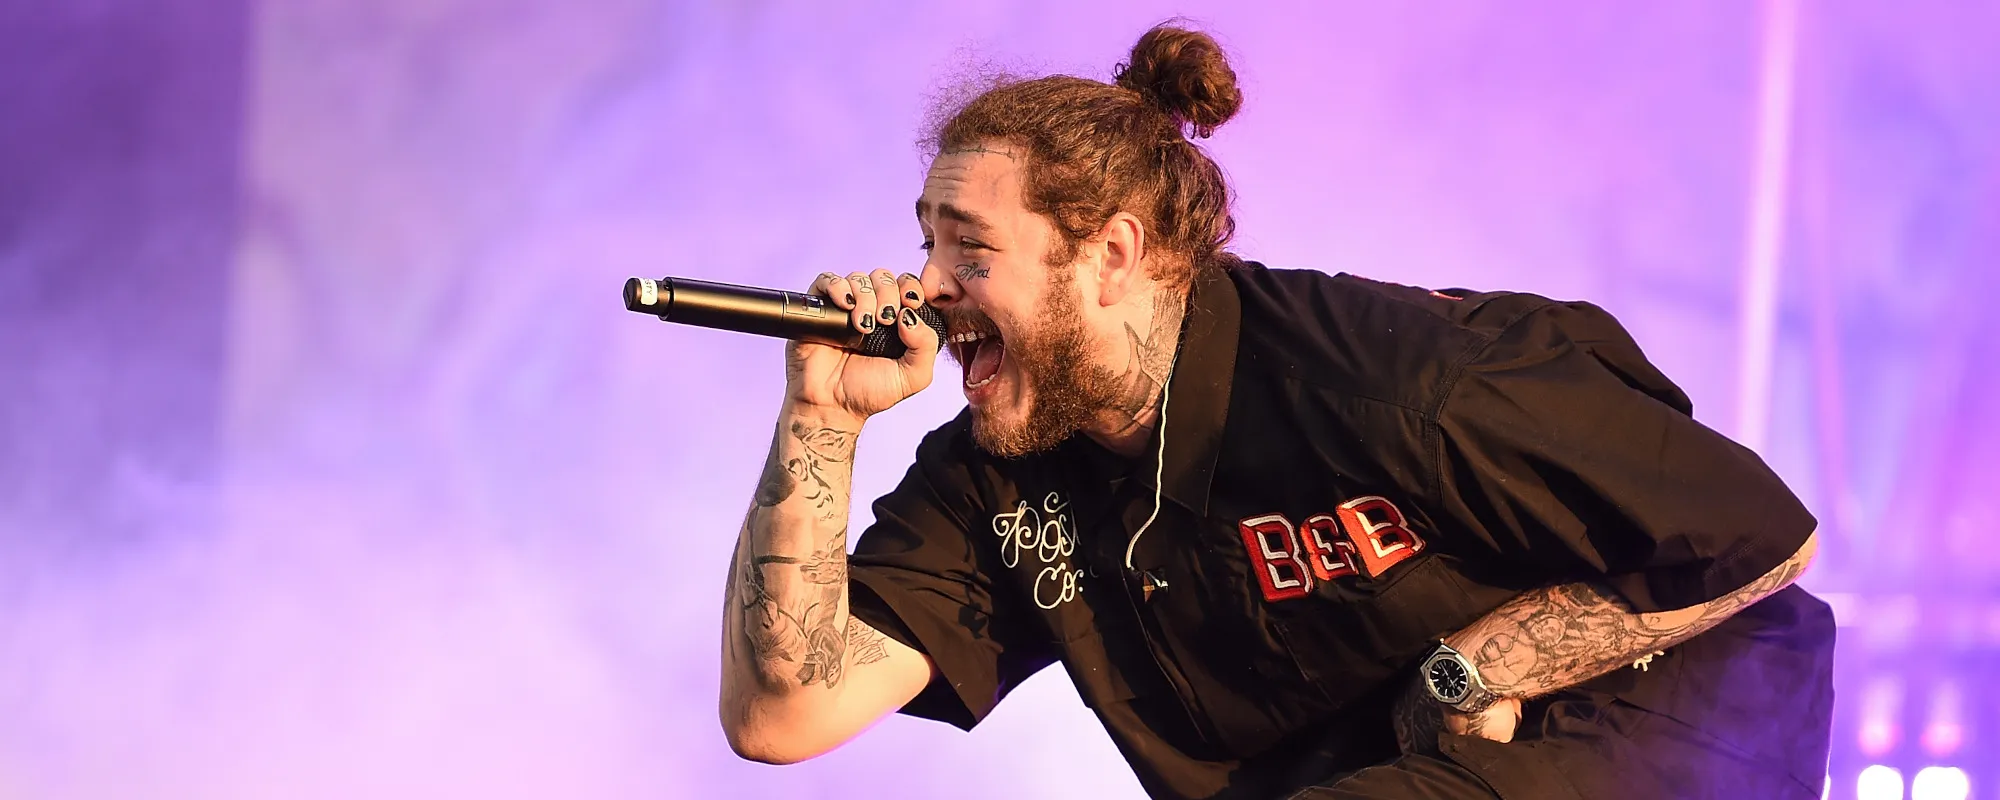 The Meaning Behind “Circles” by Post Malone and the Controversy over Who Wrote It